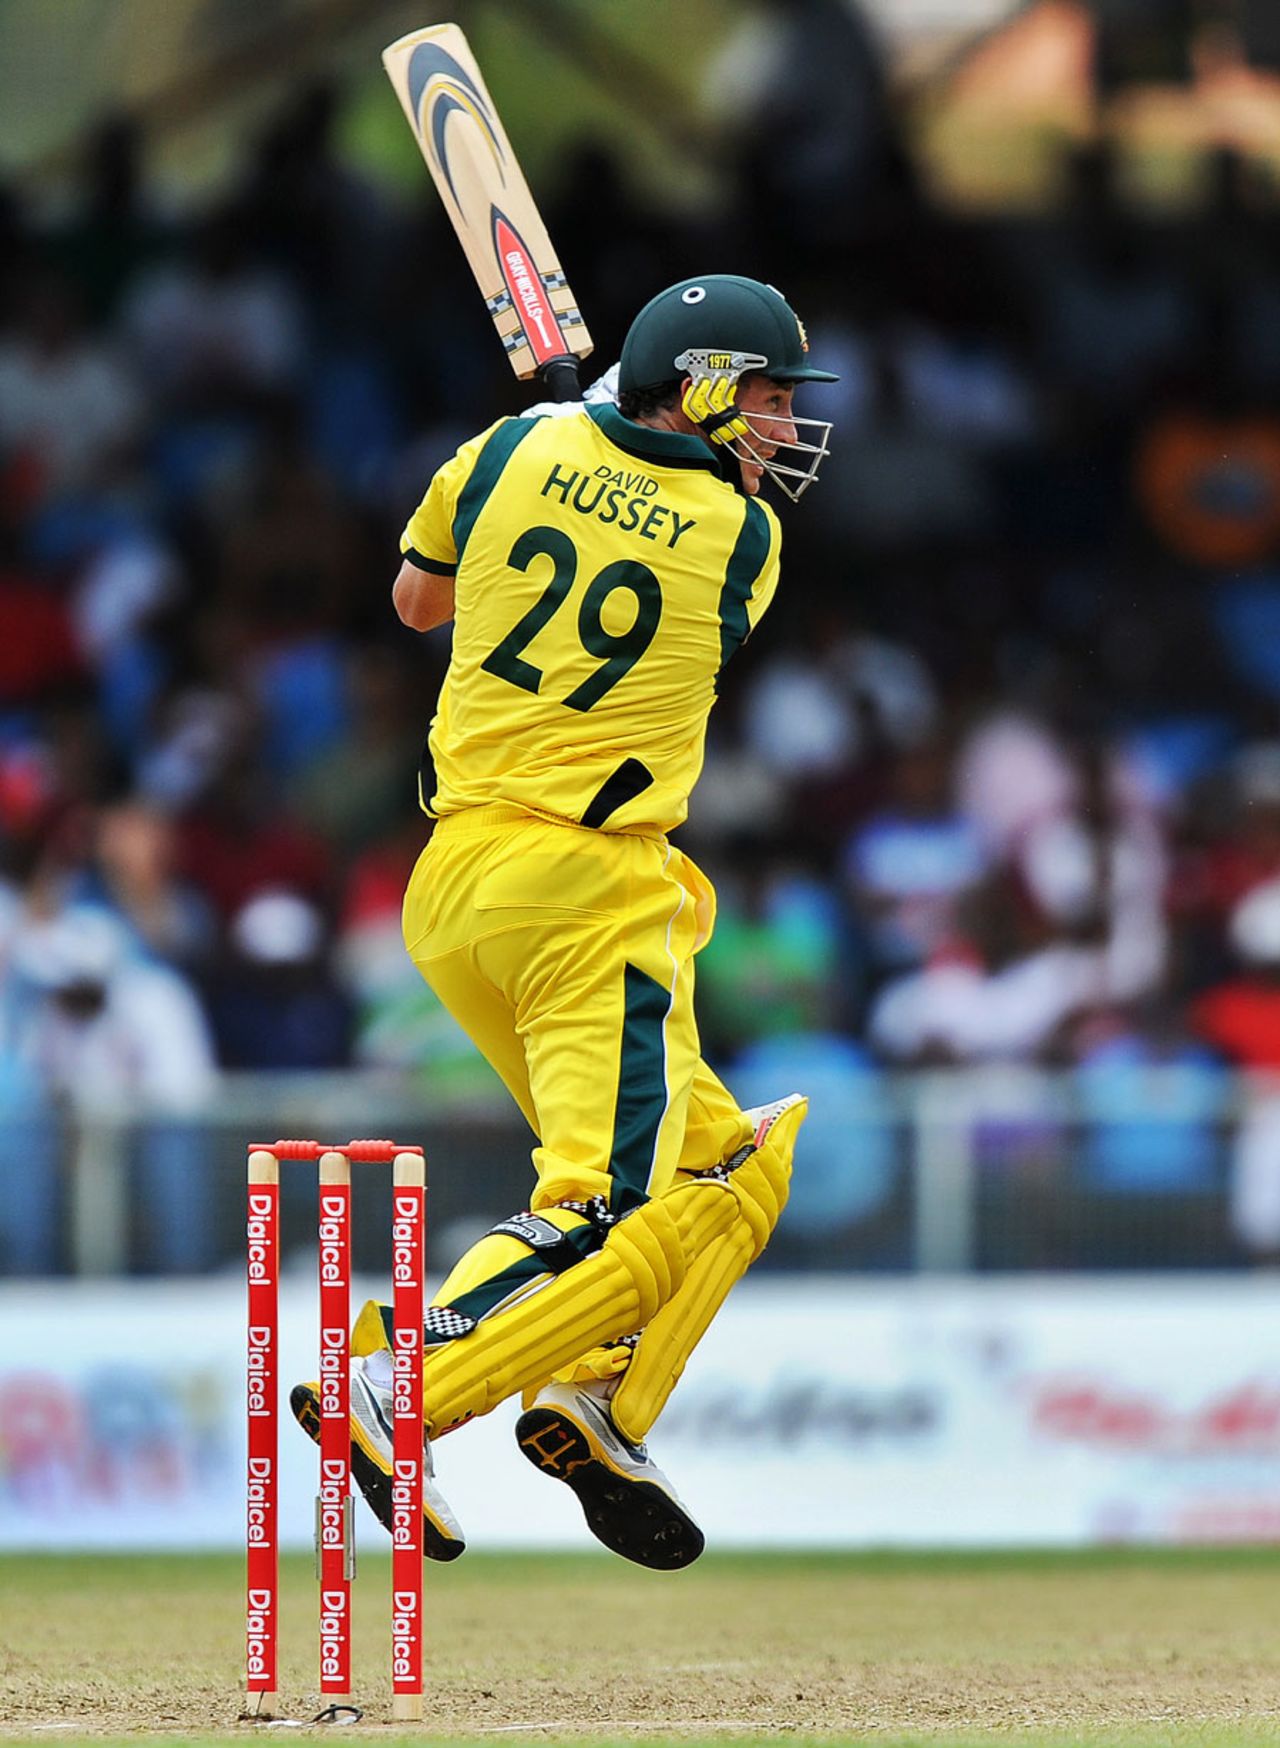 David Hussey tries to provide some impetus for Australia, West Indies v Australia, 2nd ODI, St Vincent, March 18, 2012